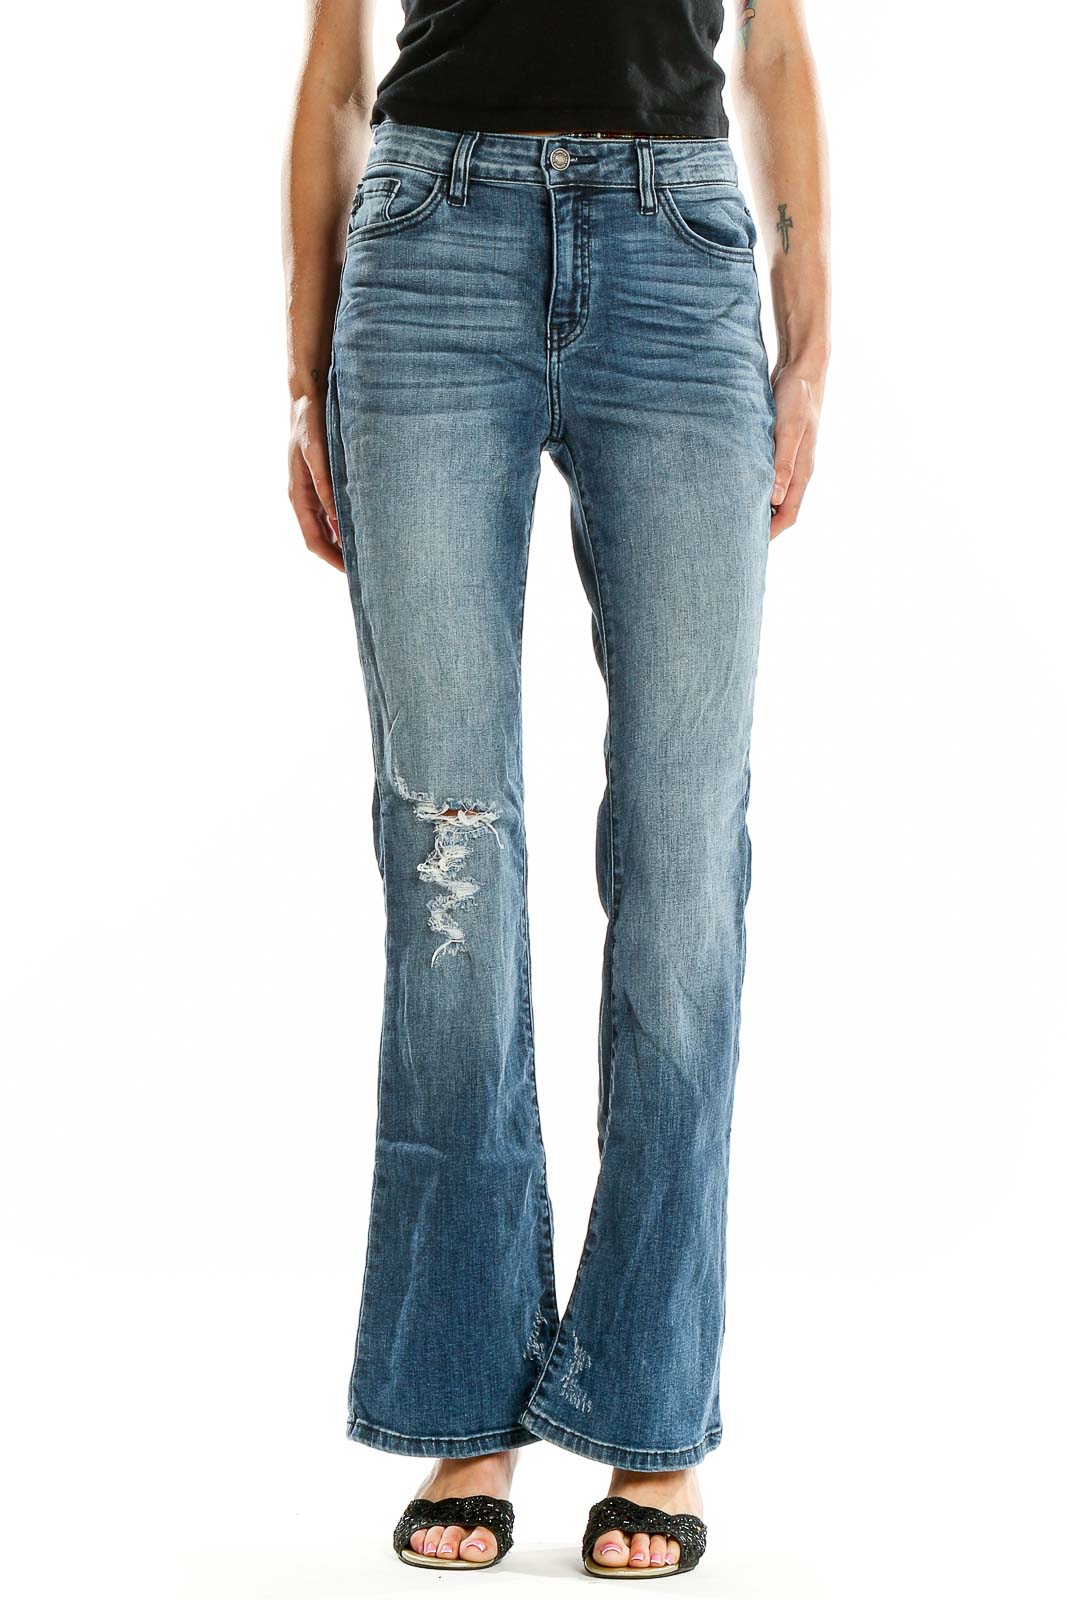 Blue Medium Wash Distressed Flare Jeans Front